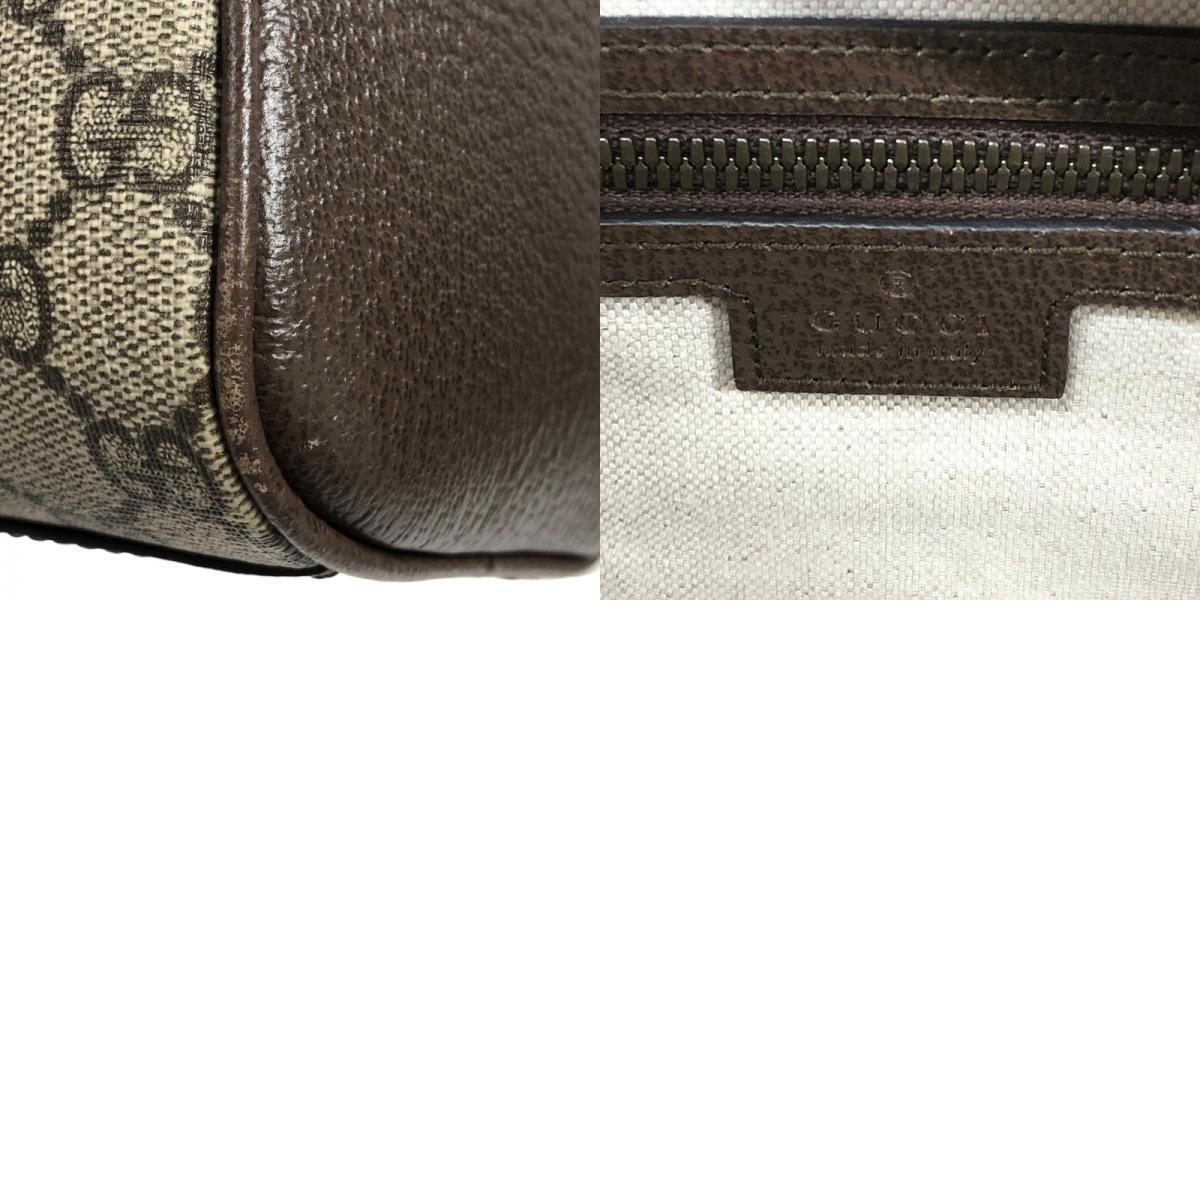  Gucci GUCCIsavoi medium top steering wheel bowling 723309 beige / Epo knee GGs pulley m Boston bag lady's used 